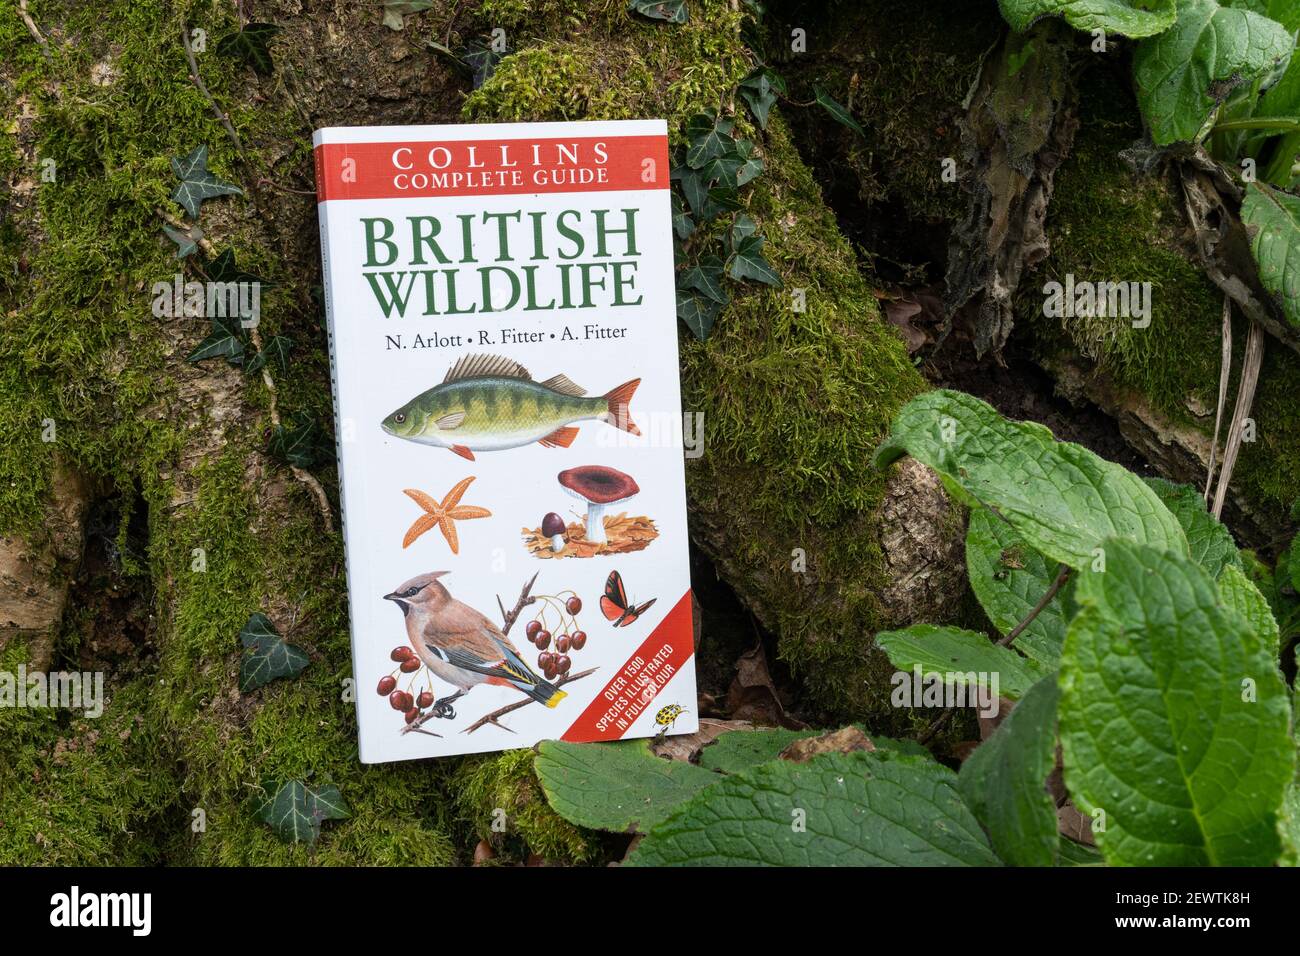 British wildlife book by Collins in woodland or countryside, UK Stock Photo